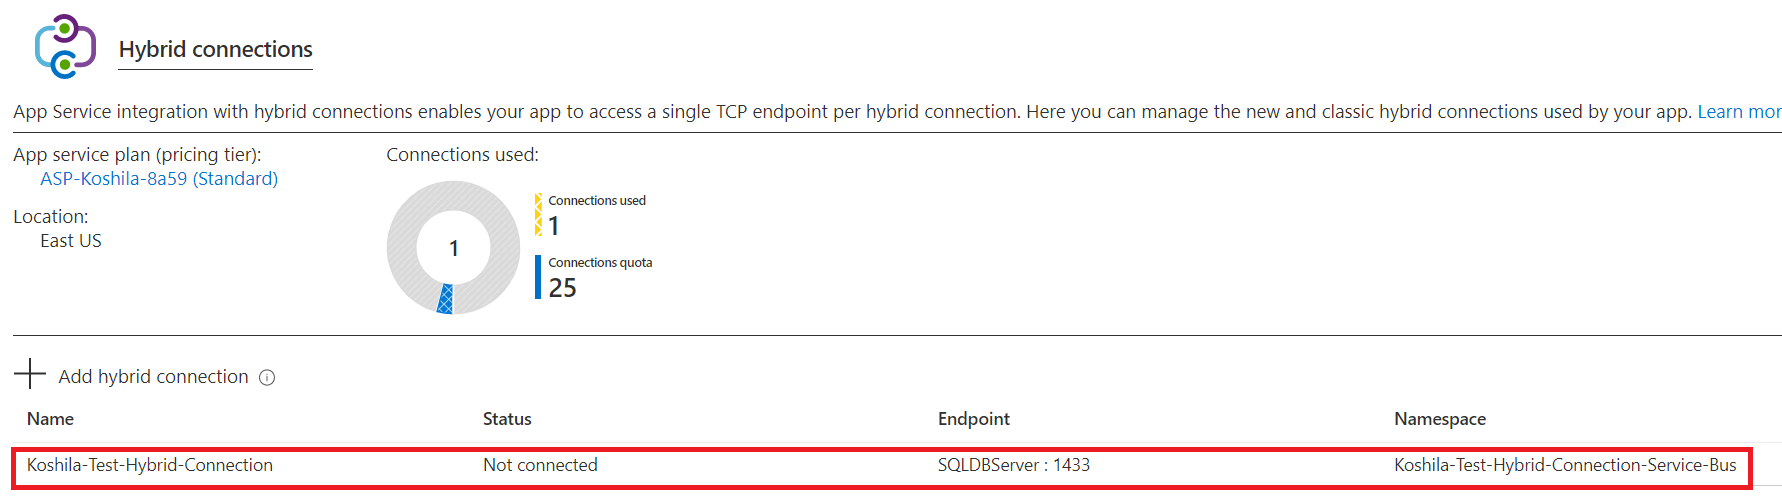 How To Configure Network Security For Azure App Service Plan